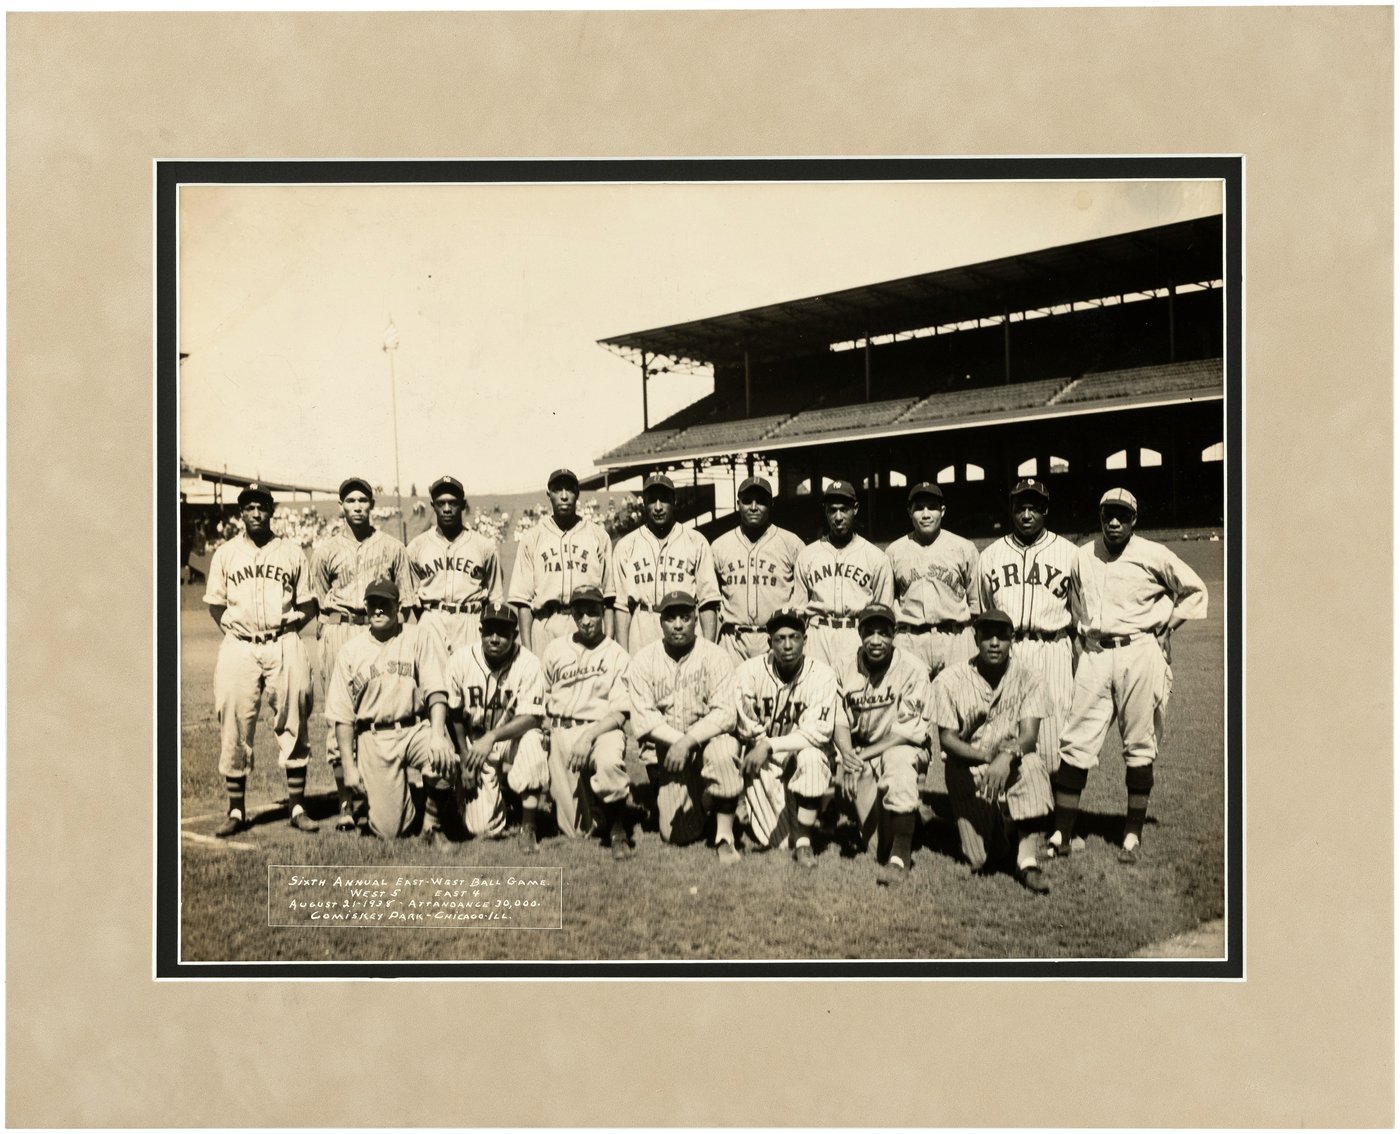 Hake's - 1922 ST. LOUIS STARS NEGRO LEAGUE TEAM PHOTO WITH COOL